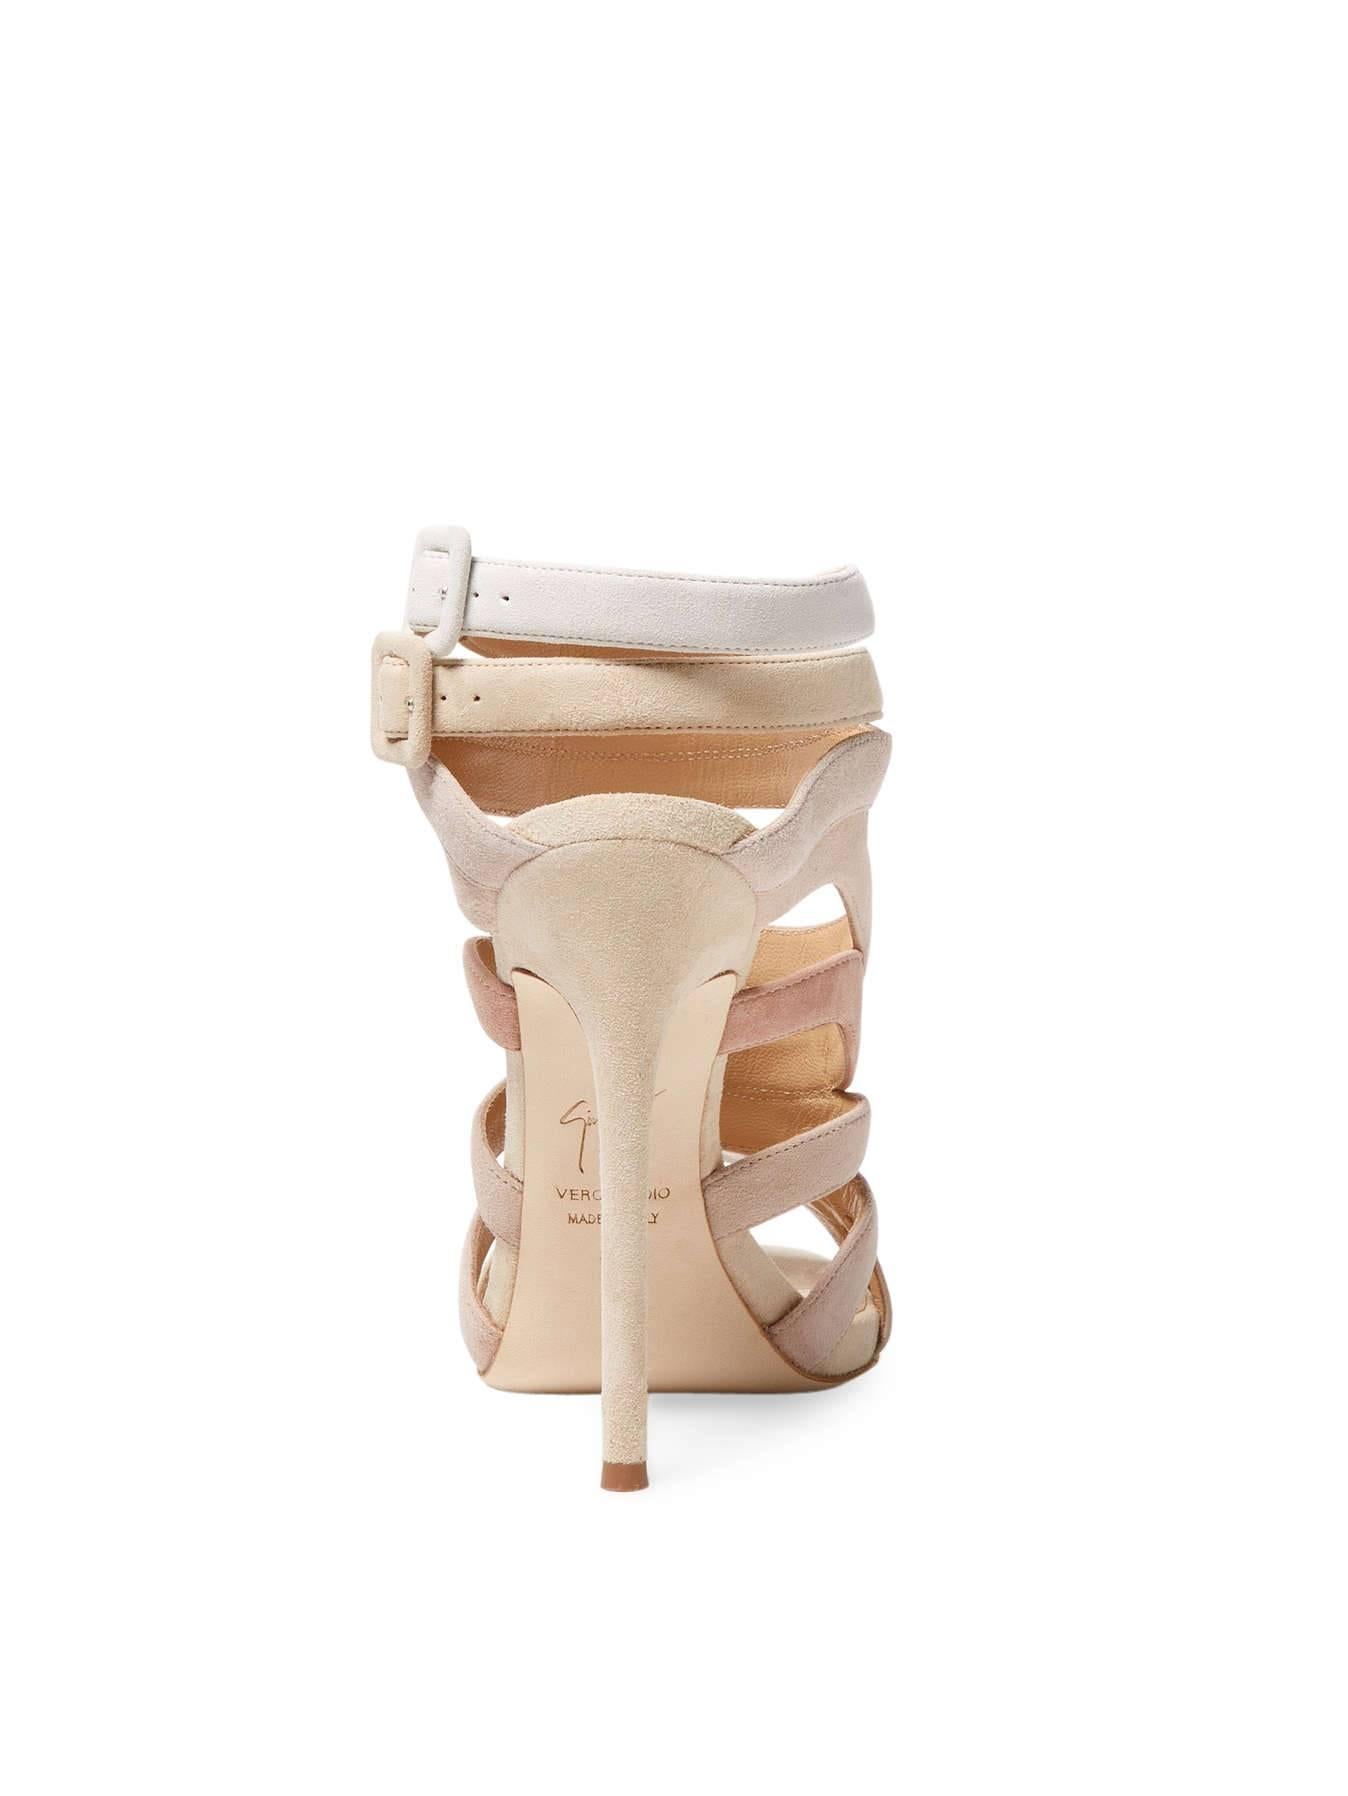 Beige Giuseppe Zanotti New Sold Out Multi Nude Suede Cage Evening Sandals Heels in Box